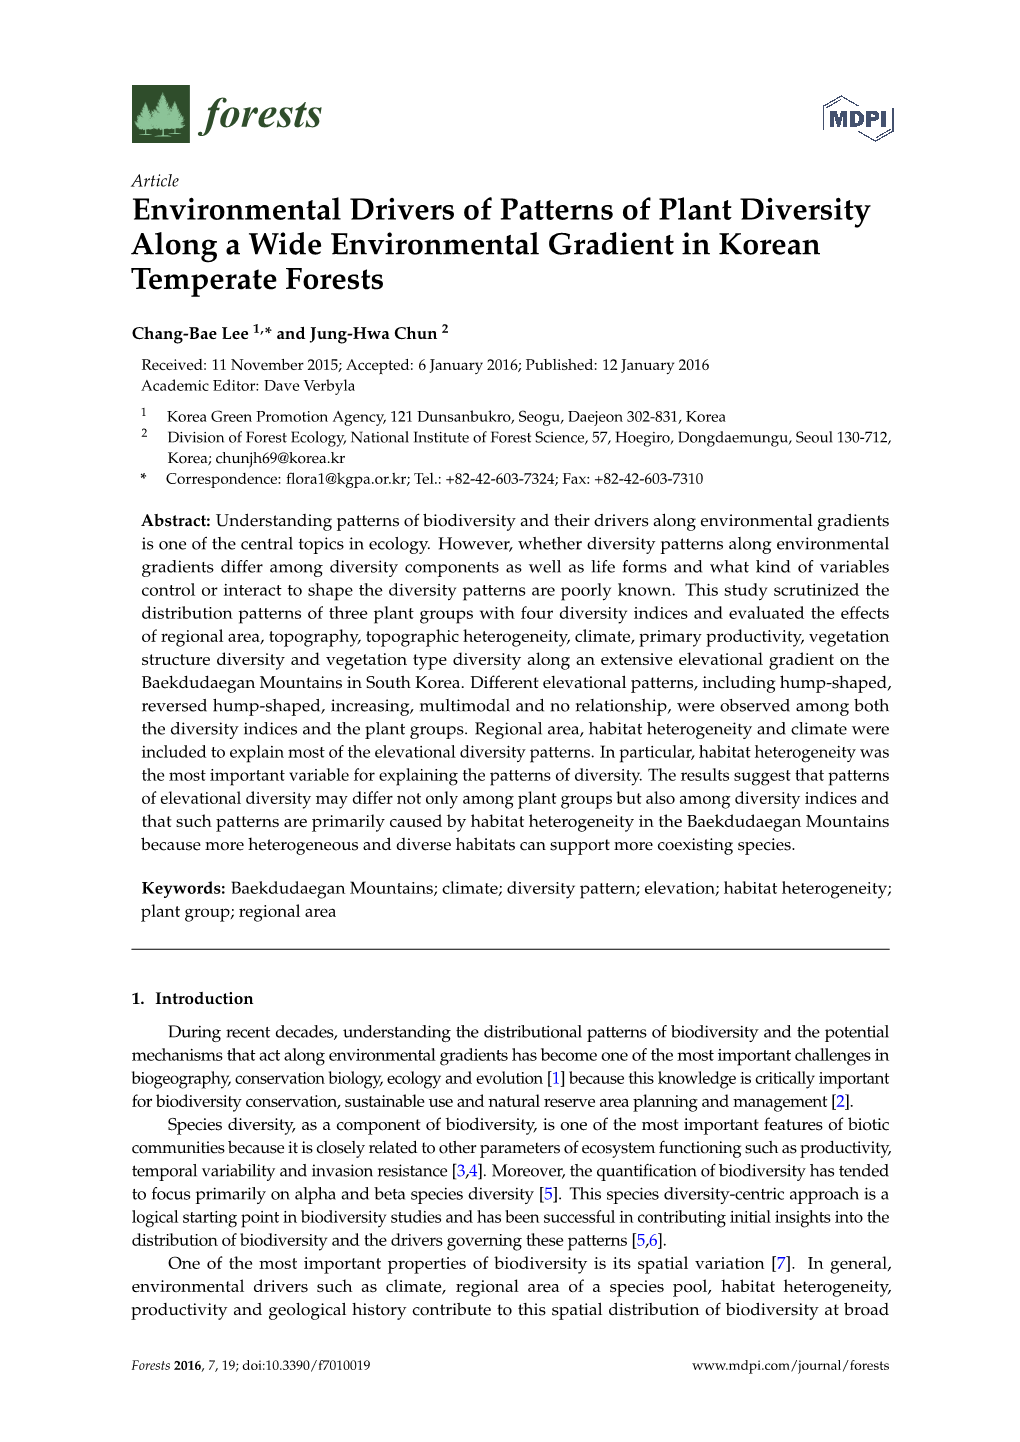 Environmental Drivers of Patterns of Plant Diversity Along a Wide Environmental Gradient in Korean Temperate Forests